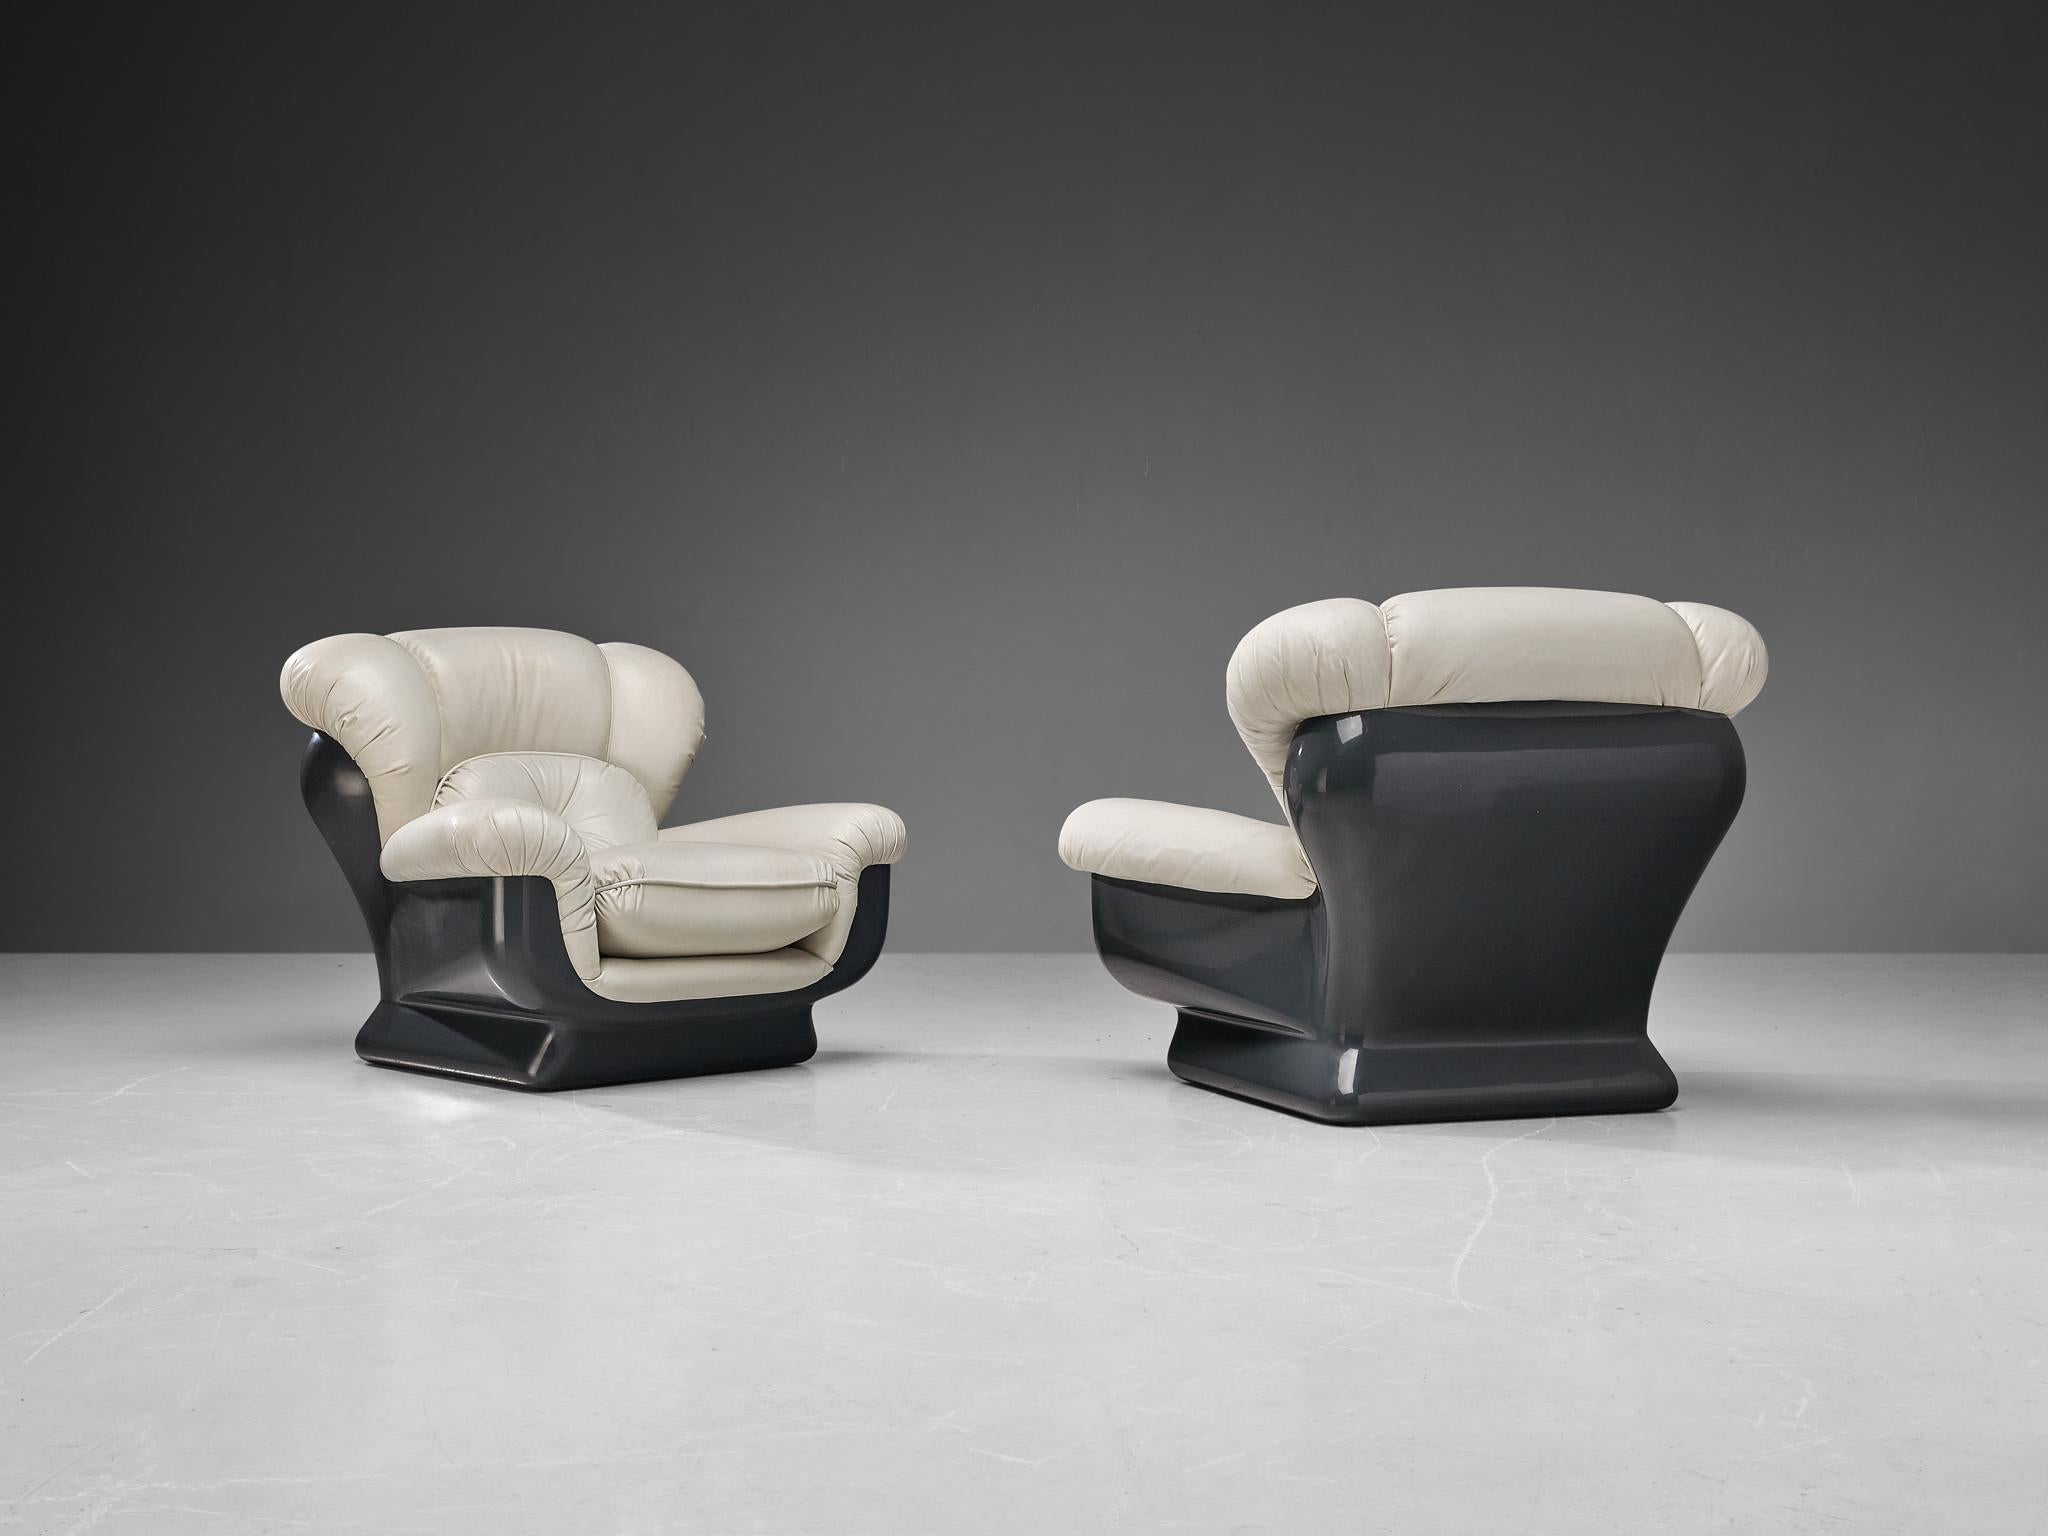 Pair of lounge chairs, fiberglass, faux leather, Italy, 1970s

A pair of very enjoyable bulky pair of  lounge chairs in leatherette. These chairs are the ideal fit for anyone looking for comfort. The large cushioning makes the sitter feel like they